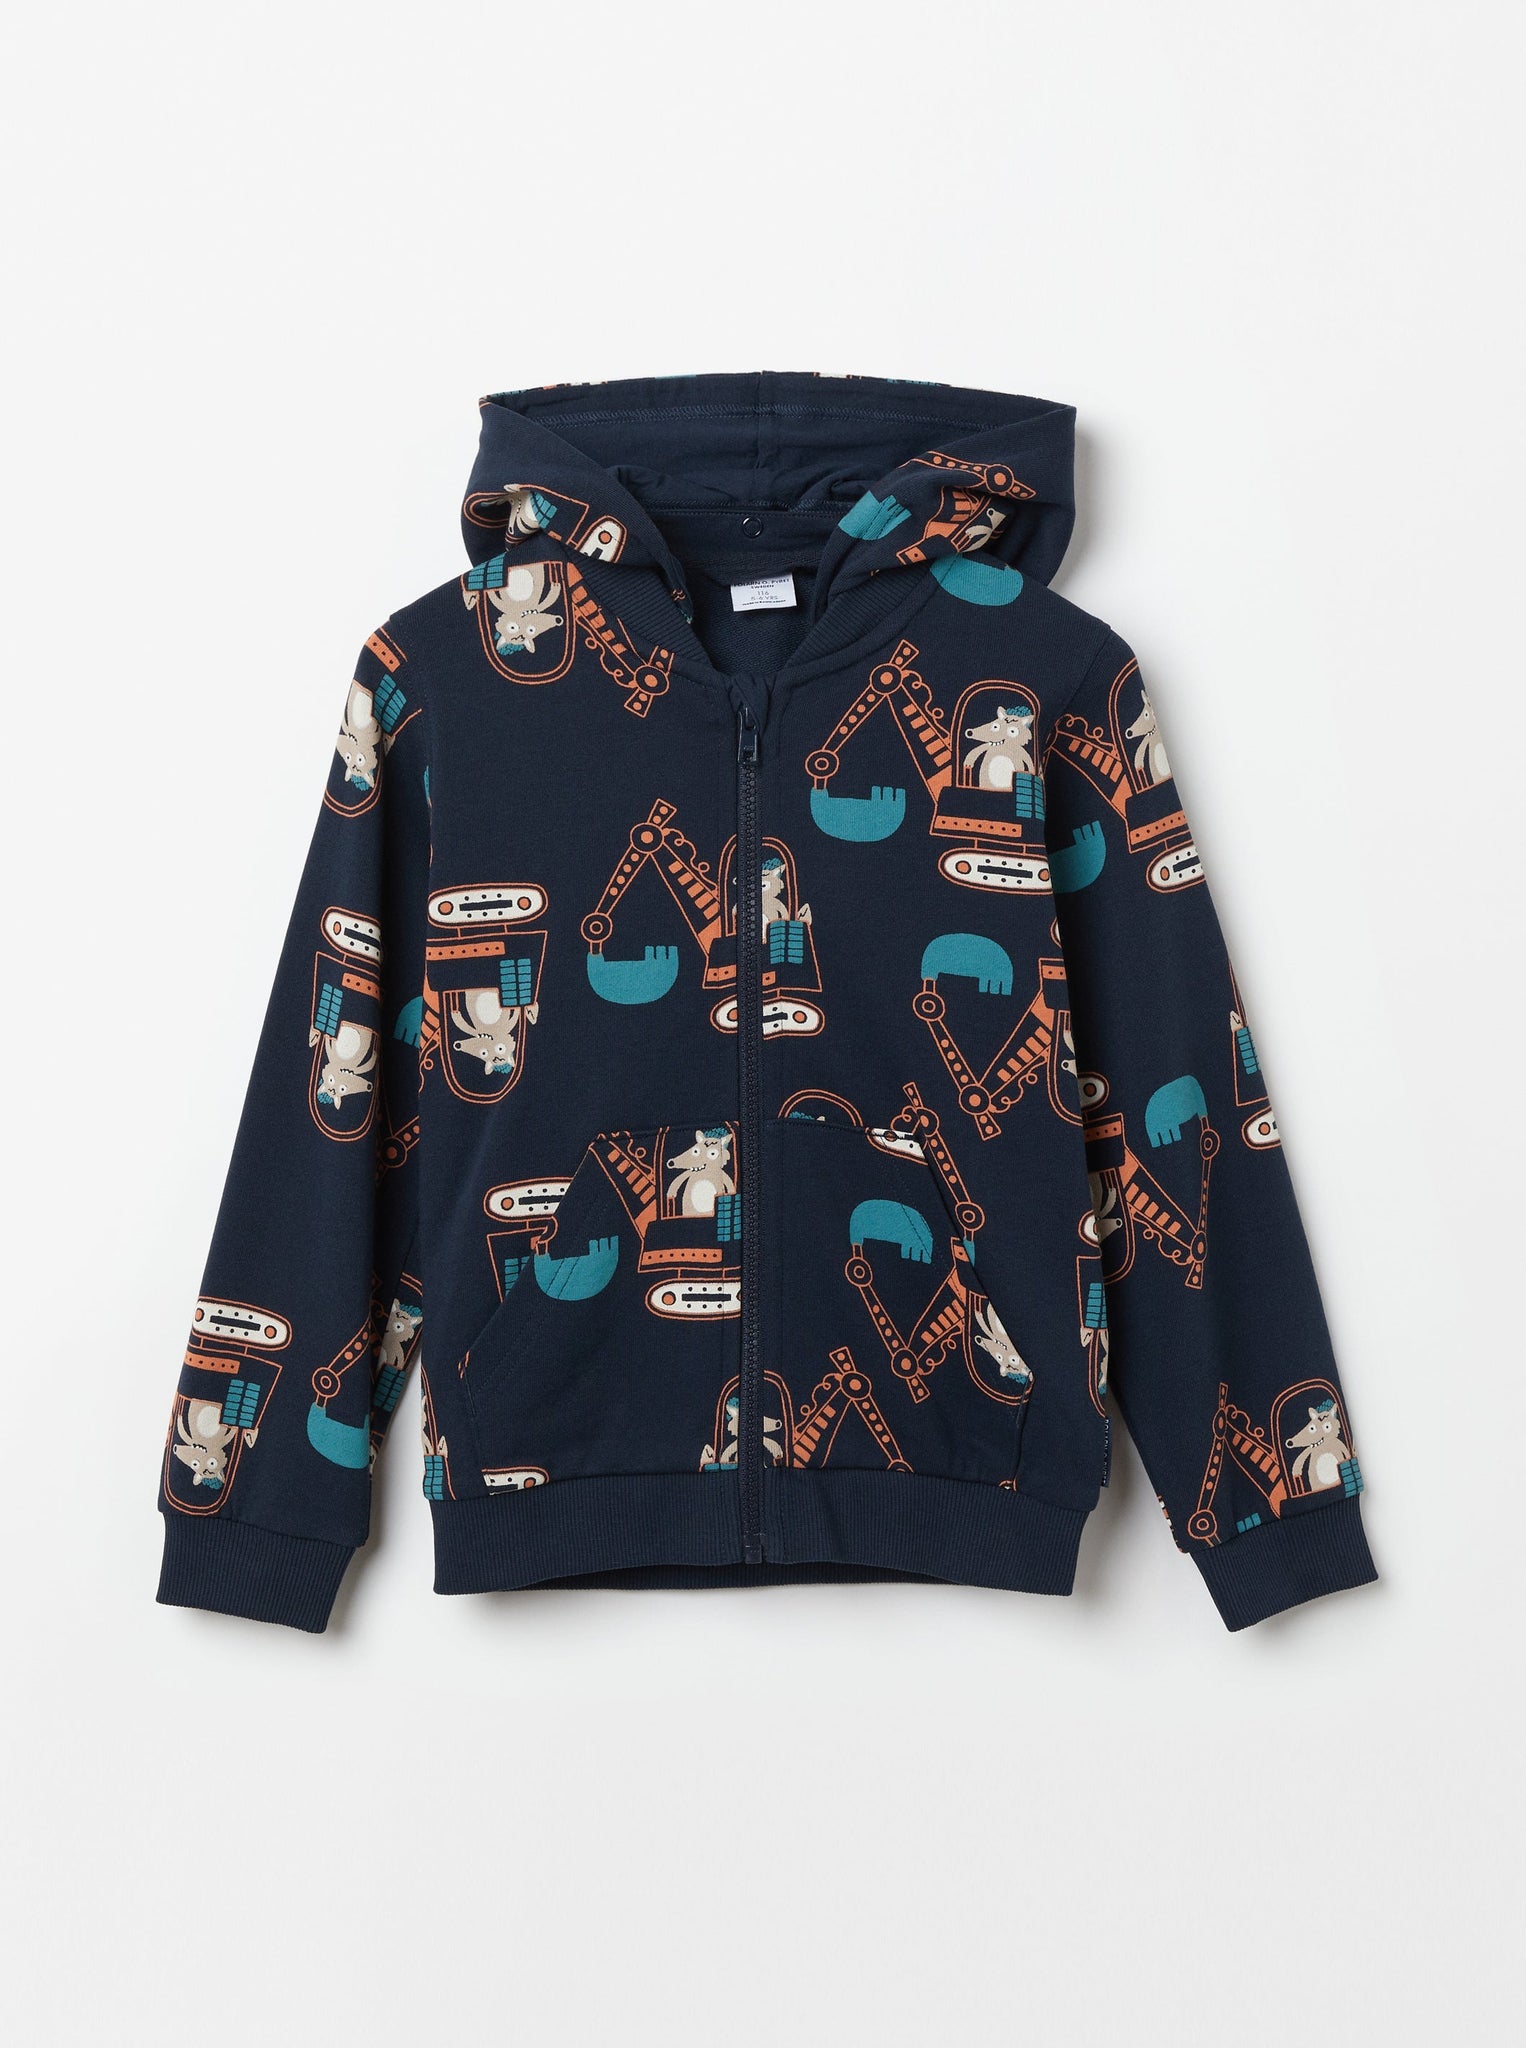 Digger Print Navy Kids Hoodie from the Polarn O. Pyret kidswear collection. Nordic kids clothes made from sustainable sources.